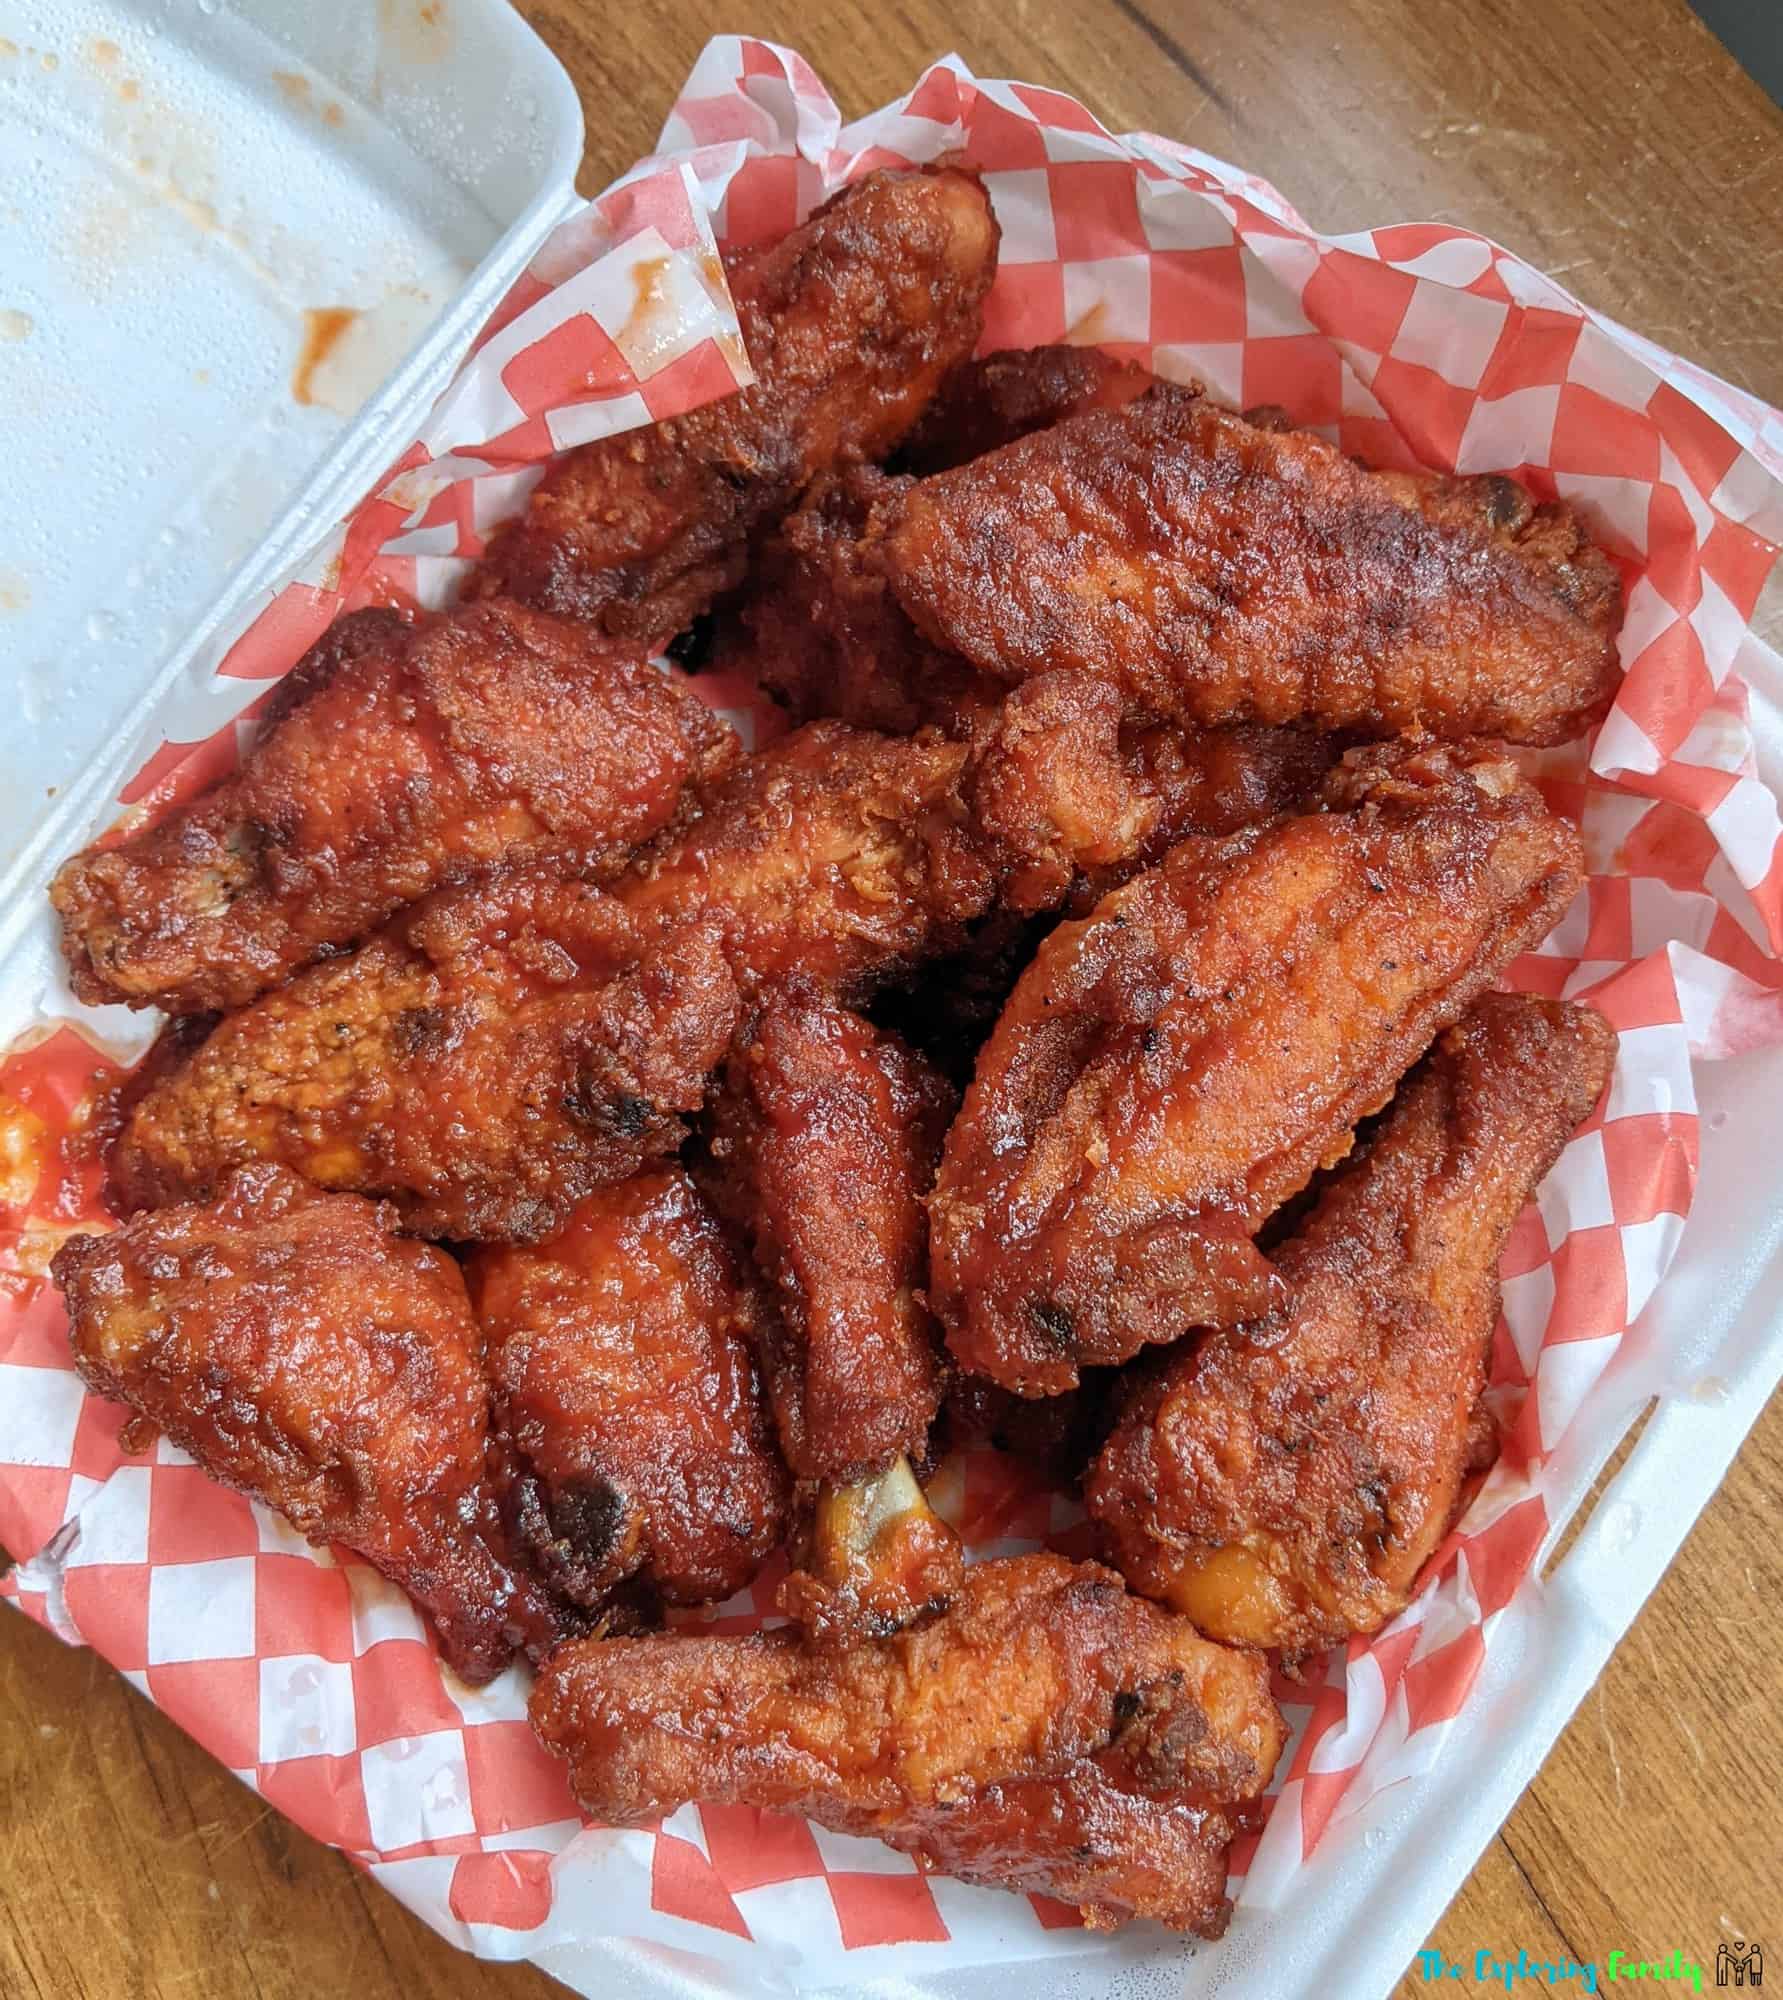 Best chicken wings in Brampton Tony & Jim's pizza and wings